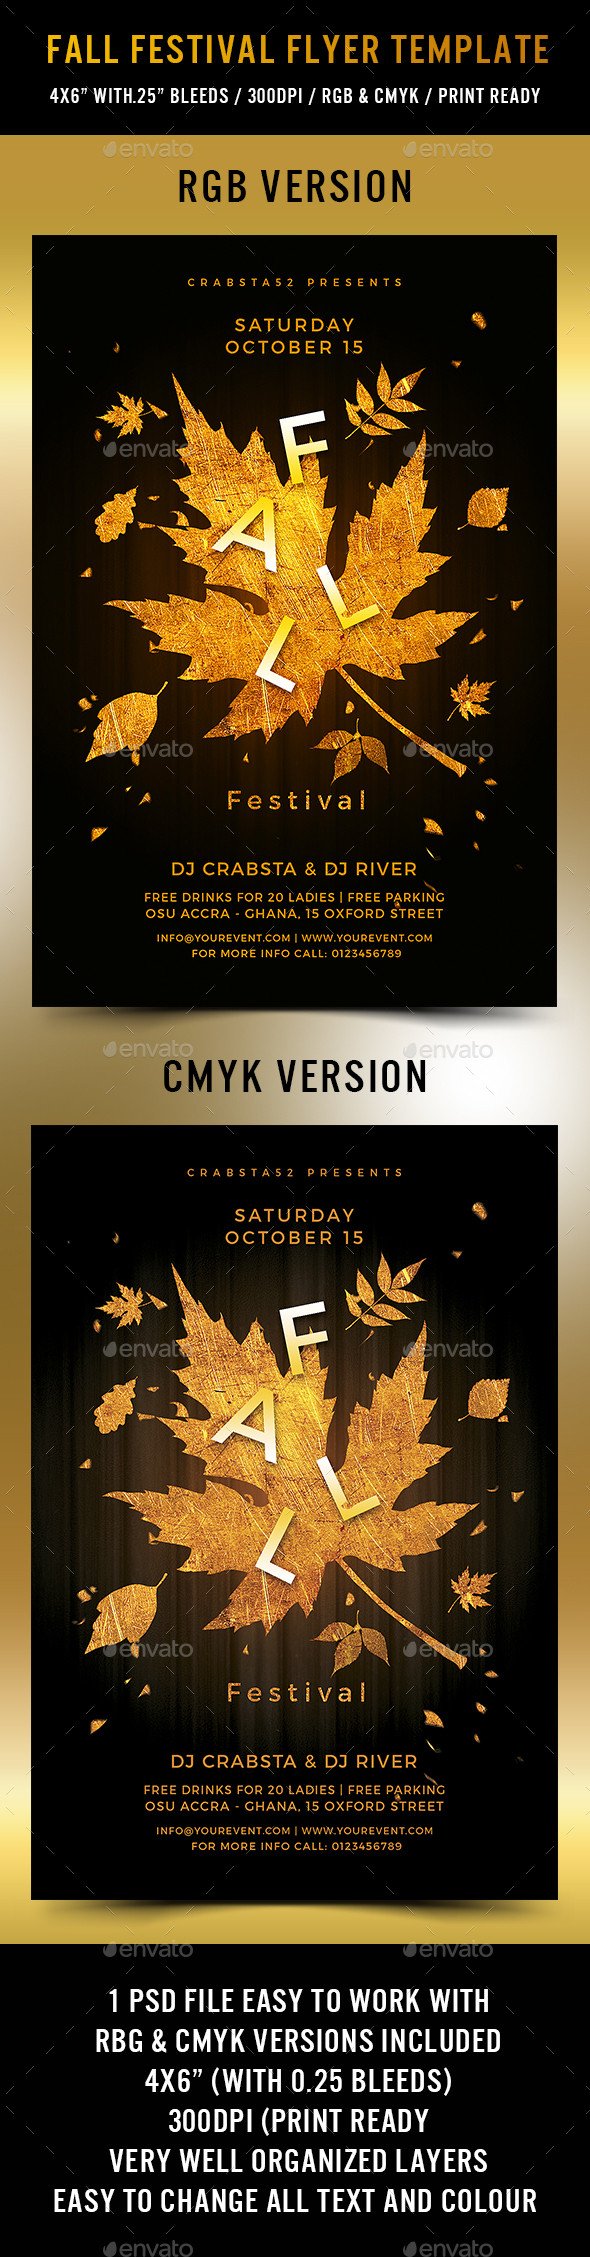 Fall Festival Flyer Template Fall Festival Flyer Template by Crabsta52